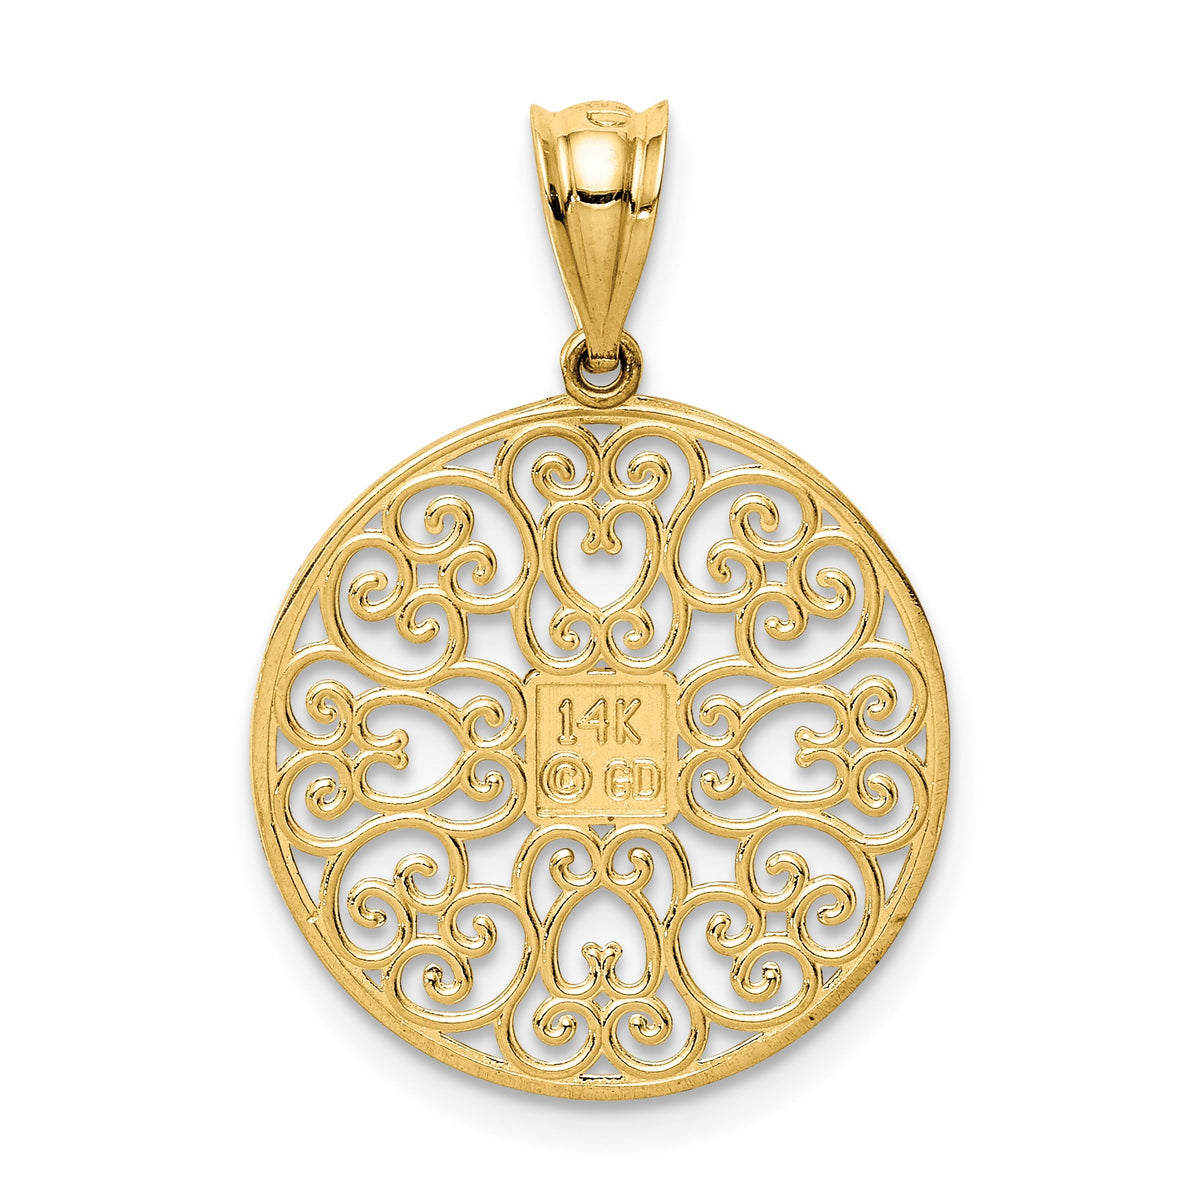 Alternate view of the 14K Yellow Gold Textured &amp; Diamond Cut Filigree Circle Pendant, 19mm by The Black Bow Jewelry Co.